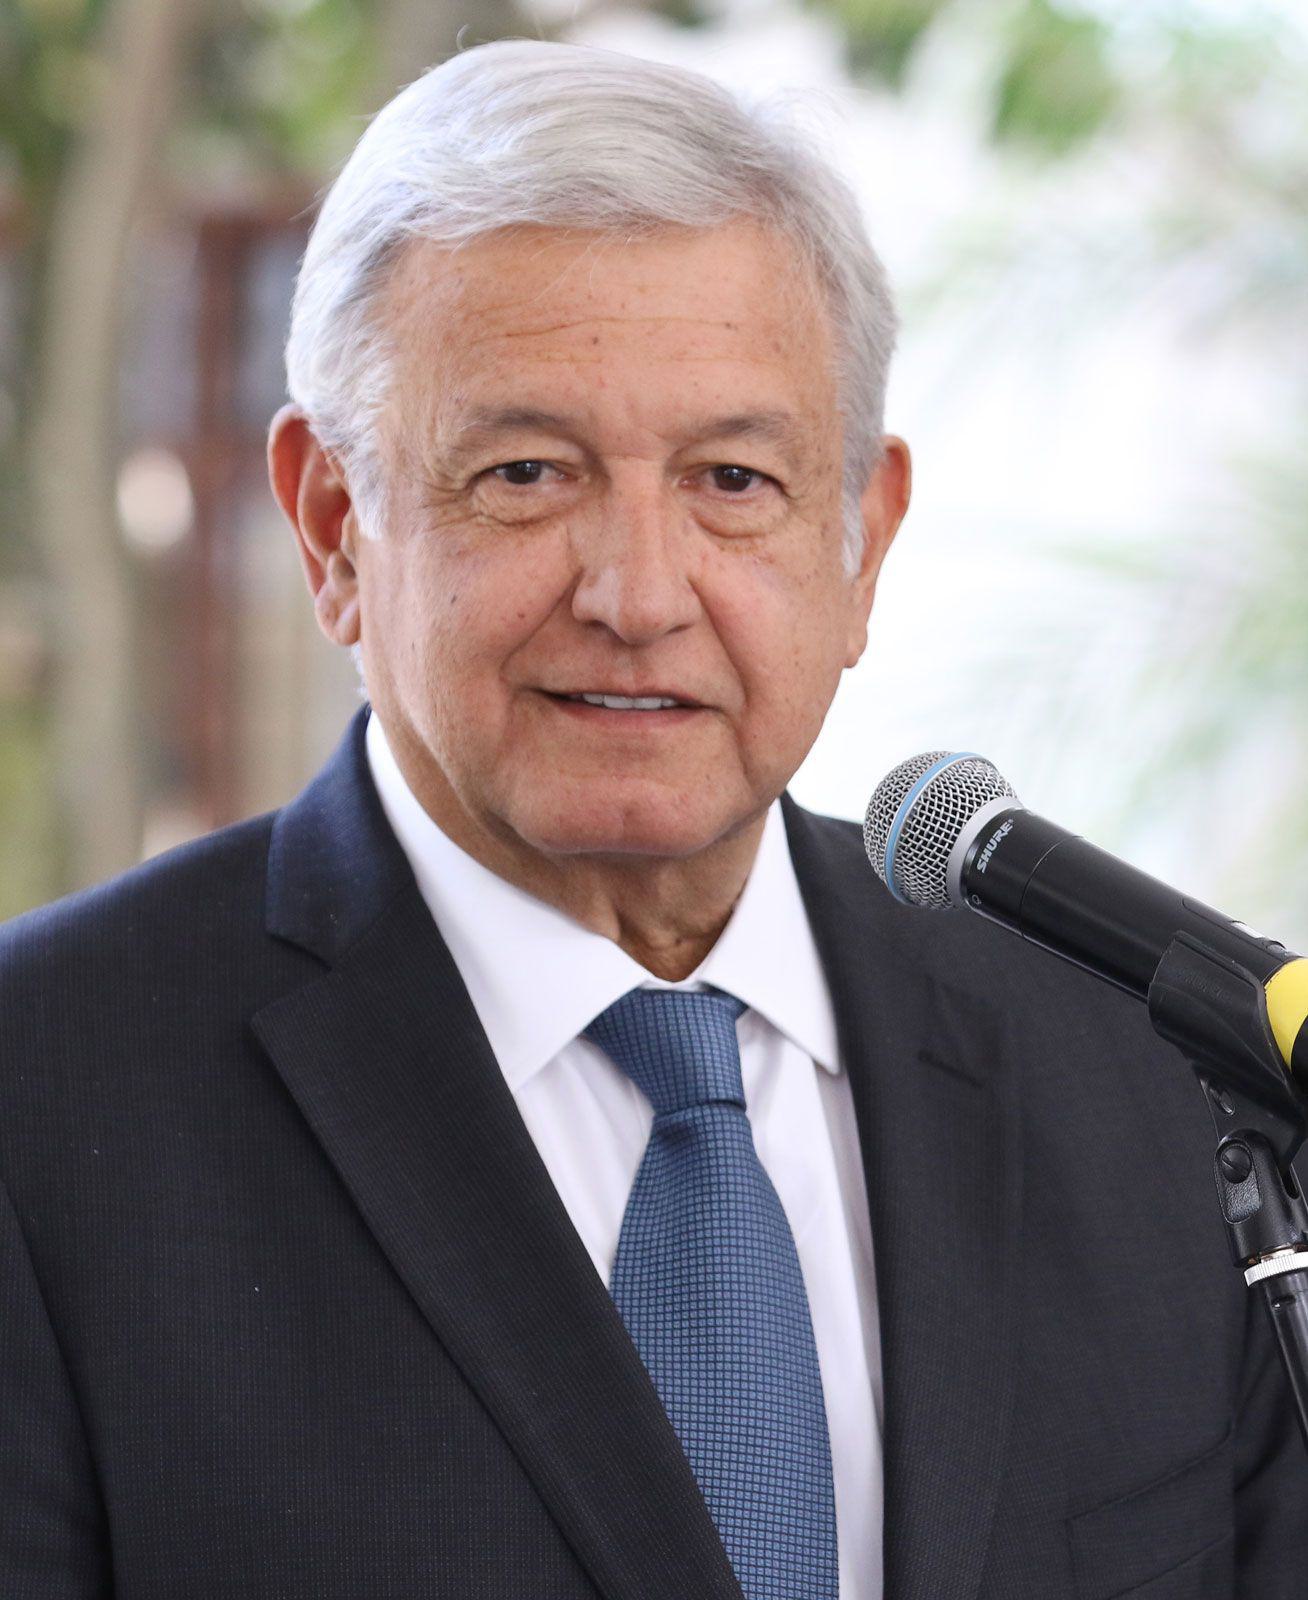 Andrés Manuel López Obrador defends disclosing a reporter's phone number, saying the law doesn't apply to him